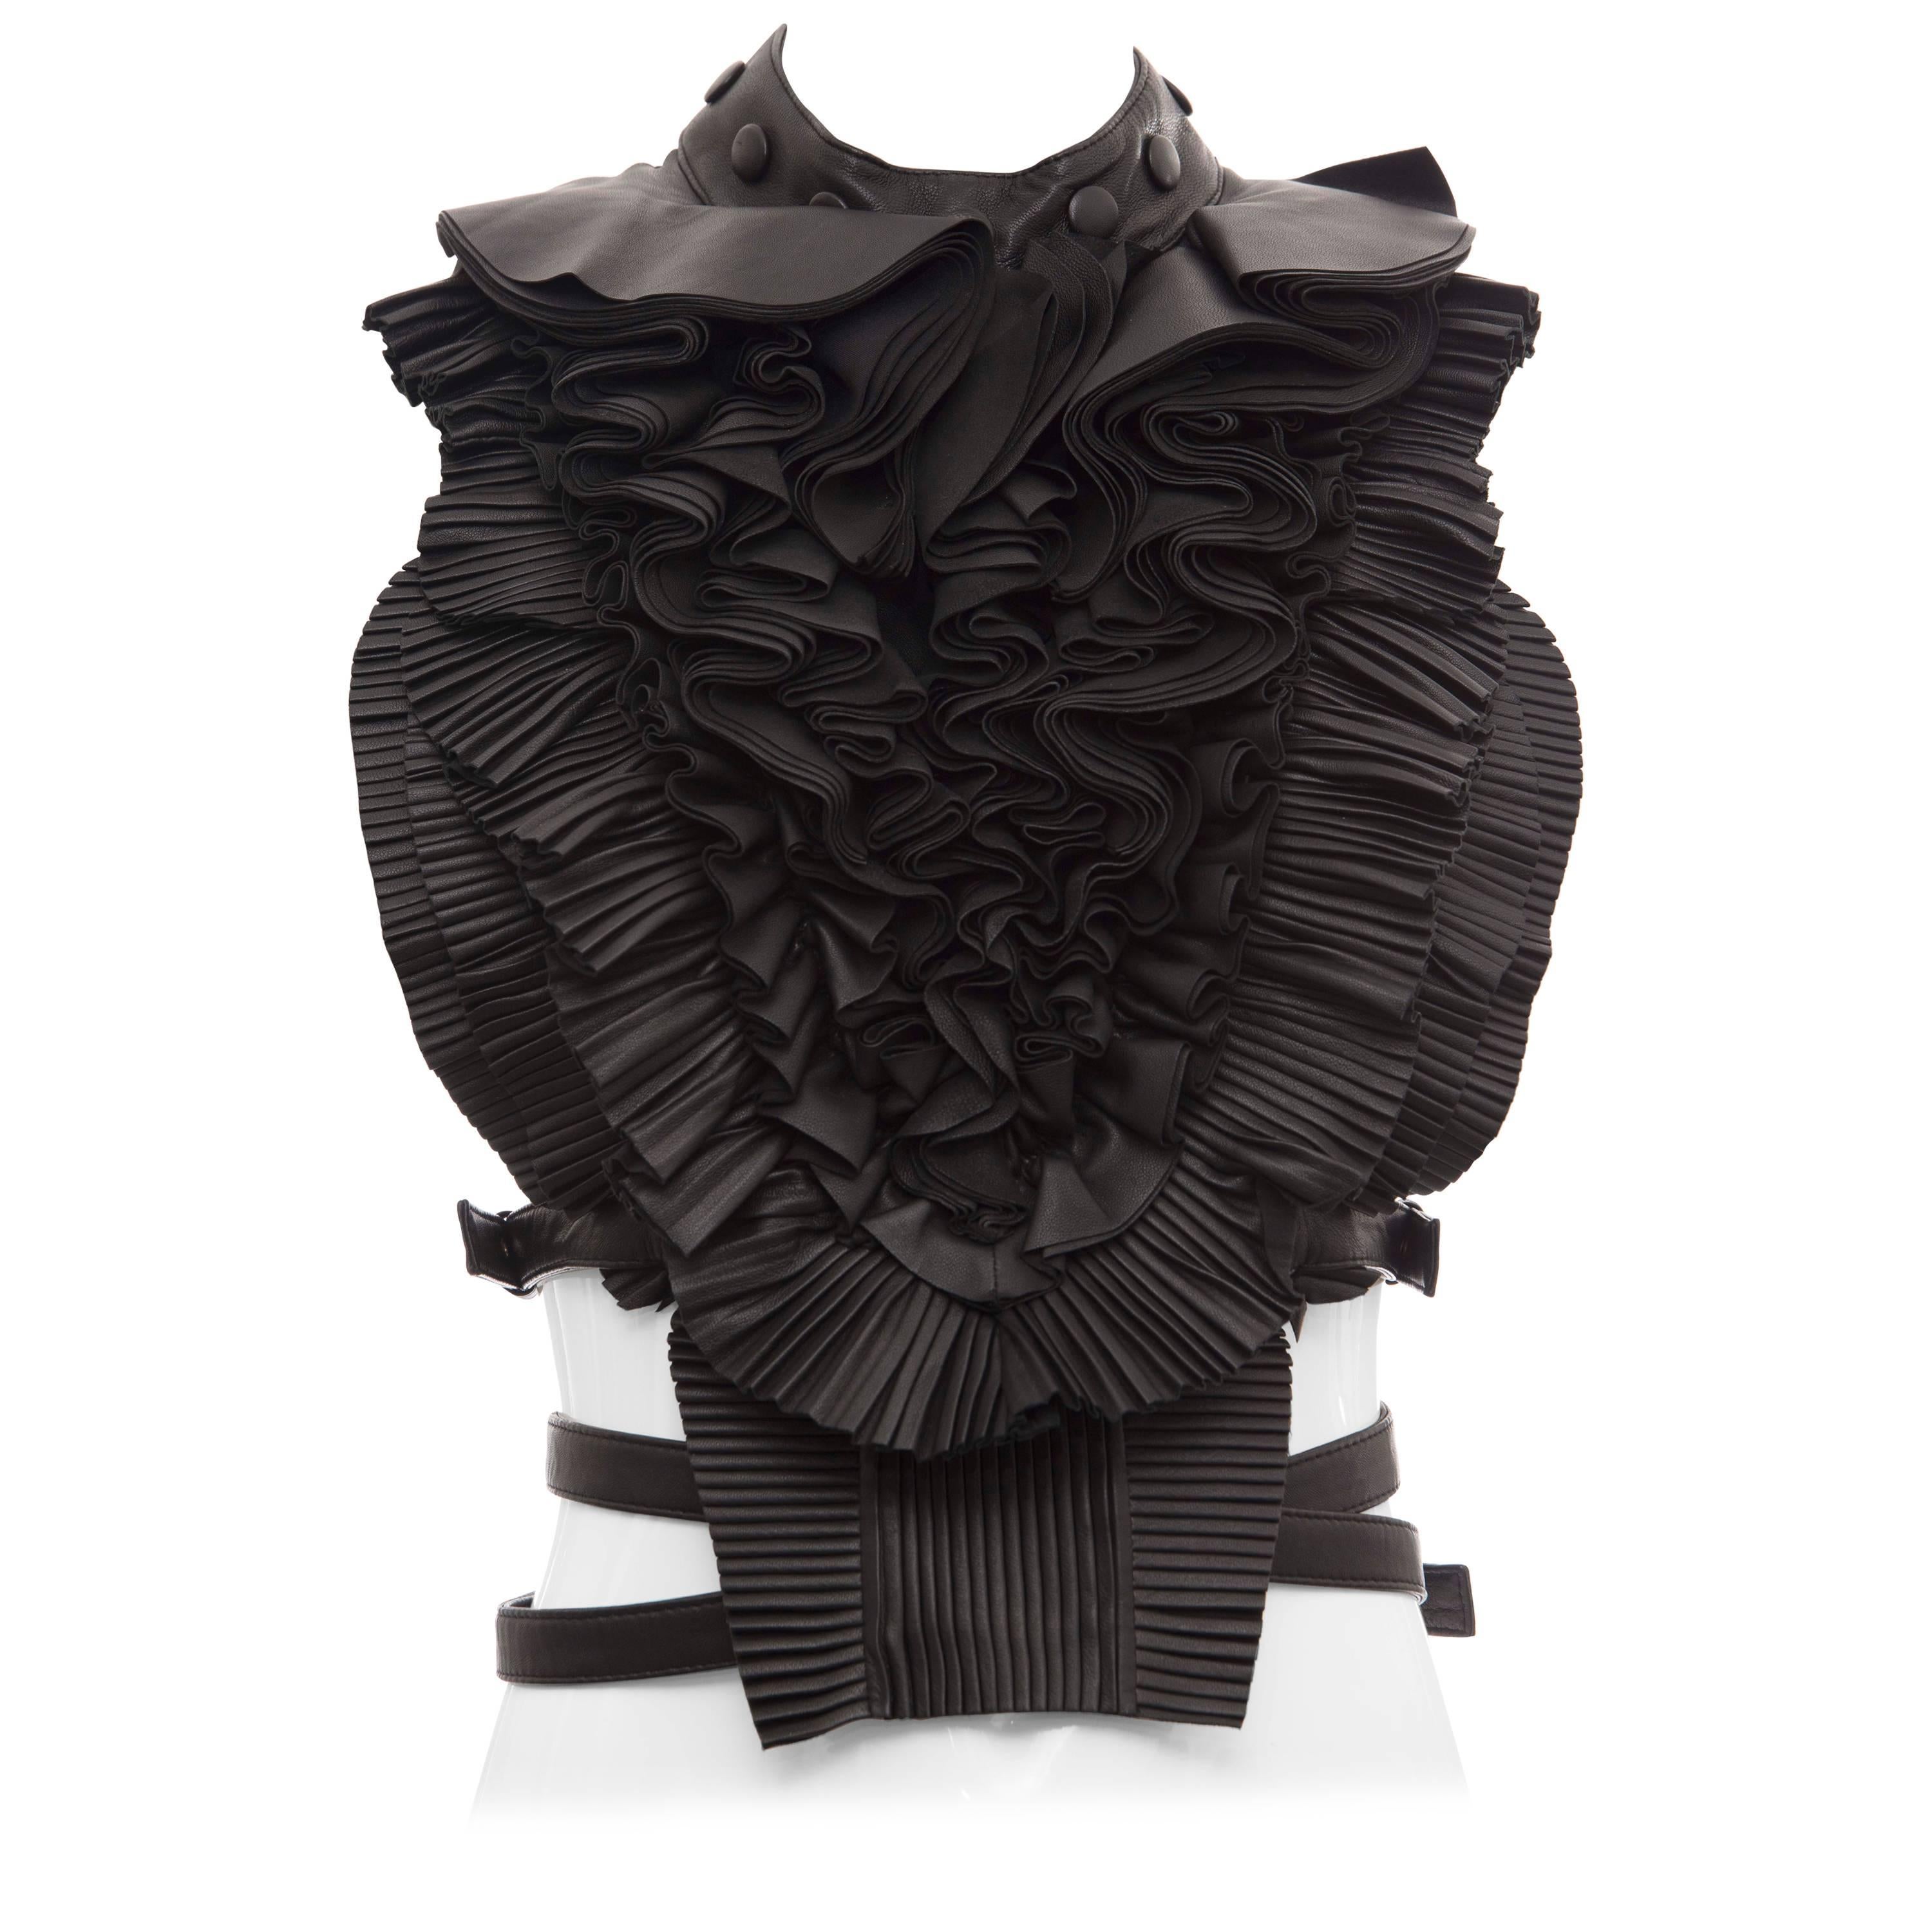 Givenchy by Riccardo Tisci Runway Black Leather Ruffled Harness Top, Spring 2011